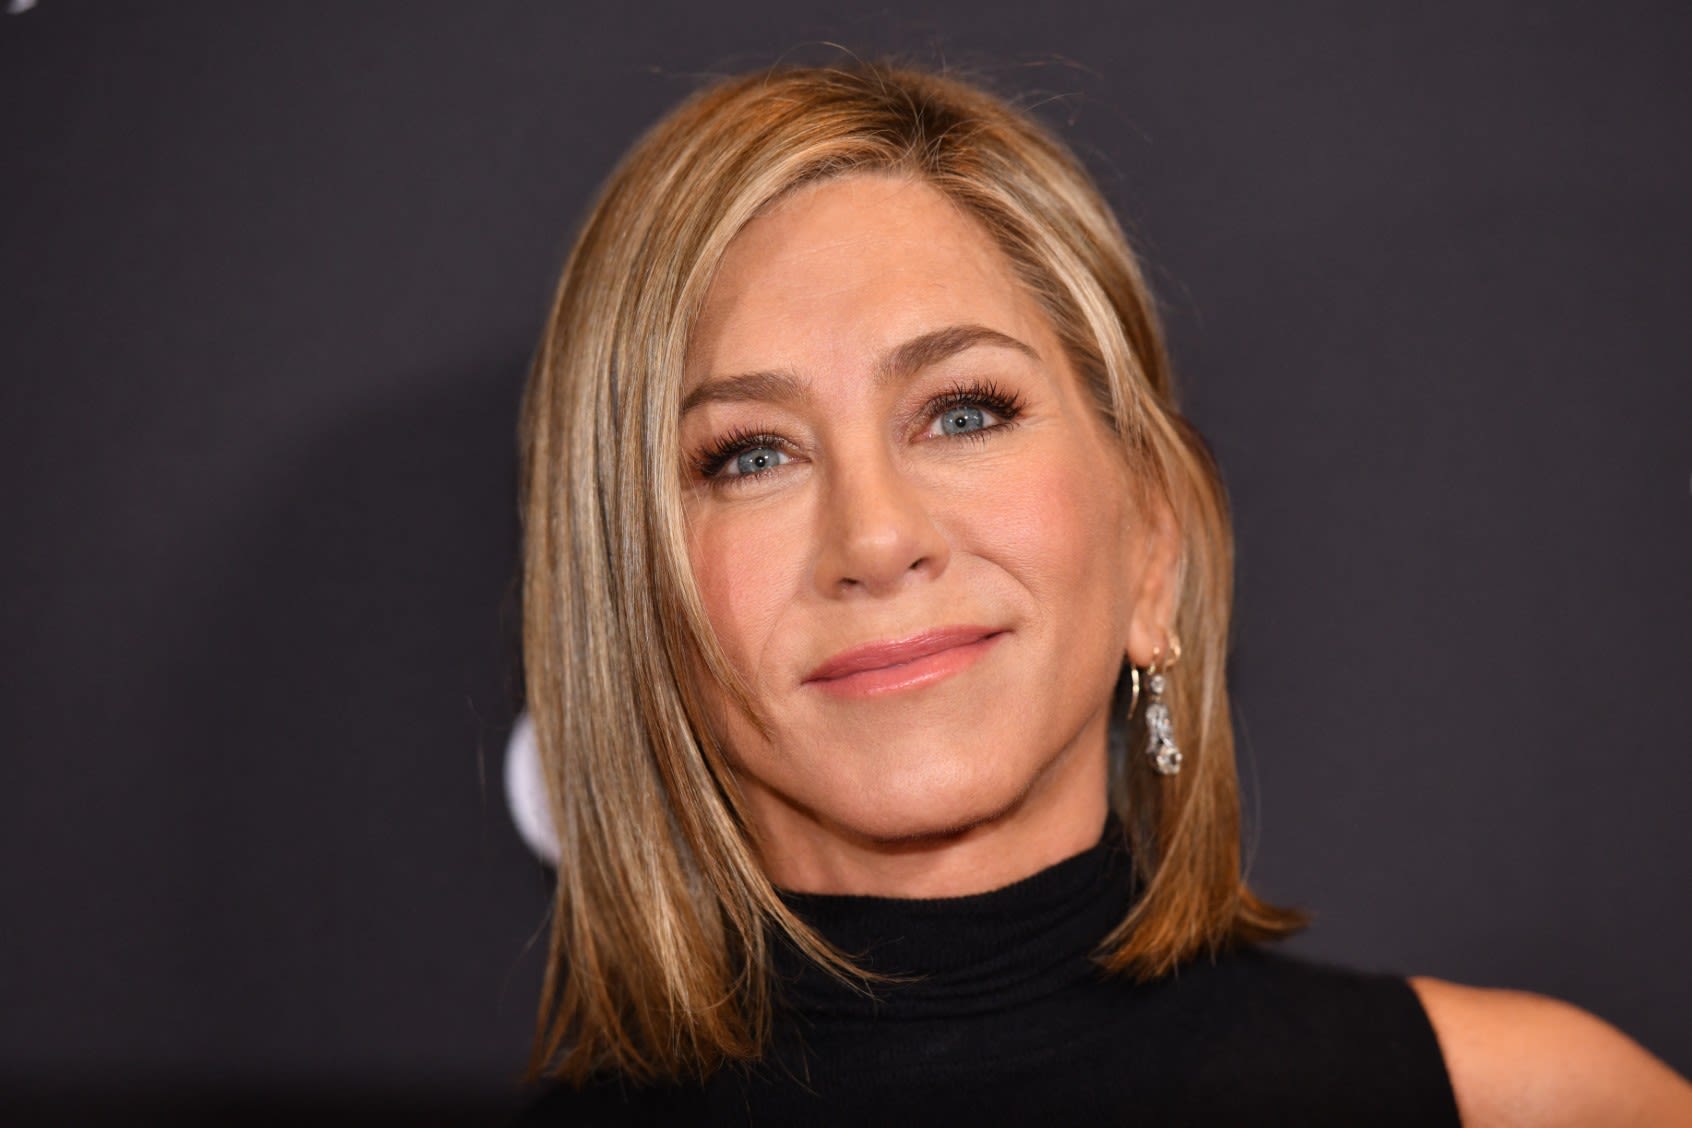 Jennifer Aniston teams with Diablo Cody for remake of "9 to 5"